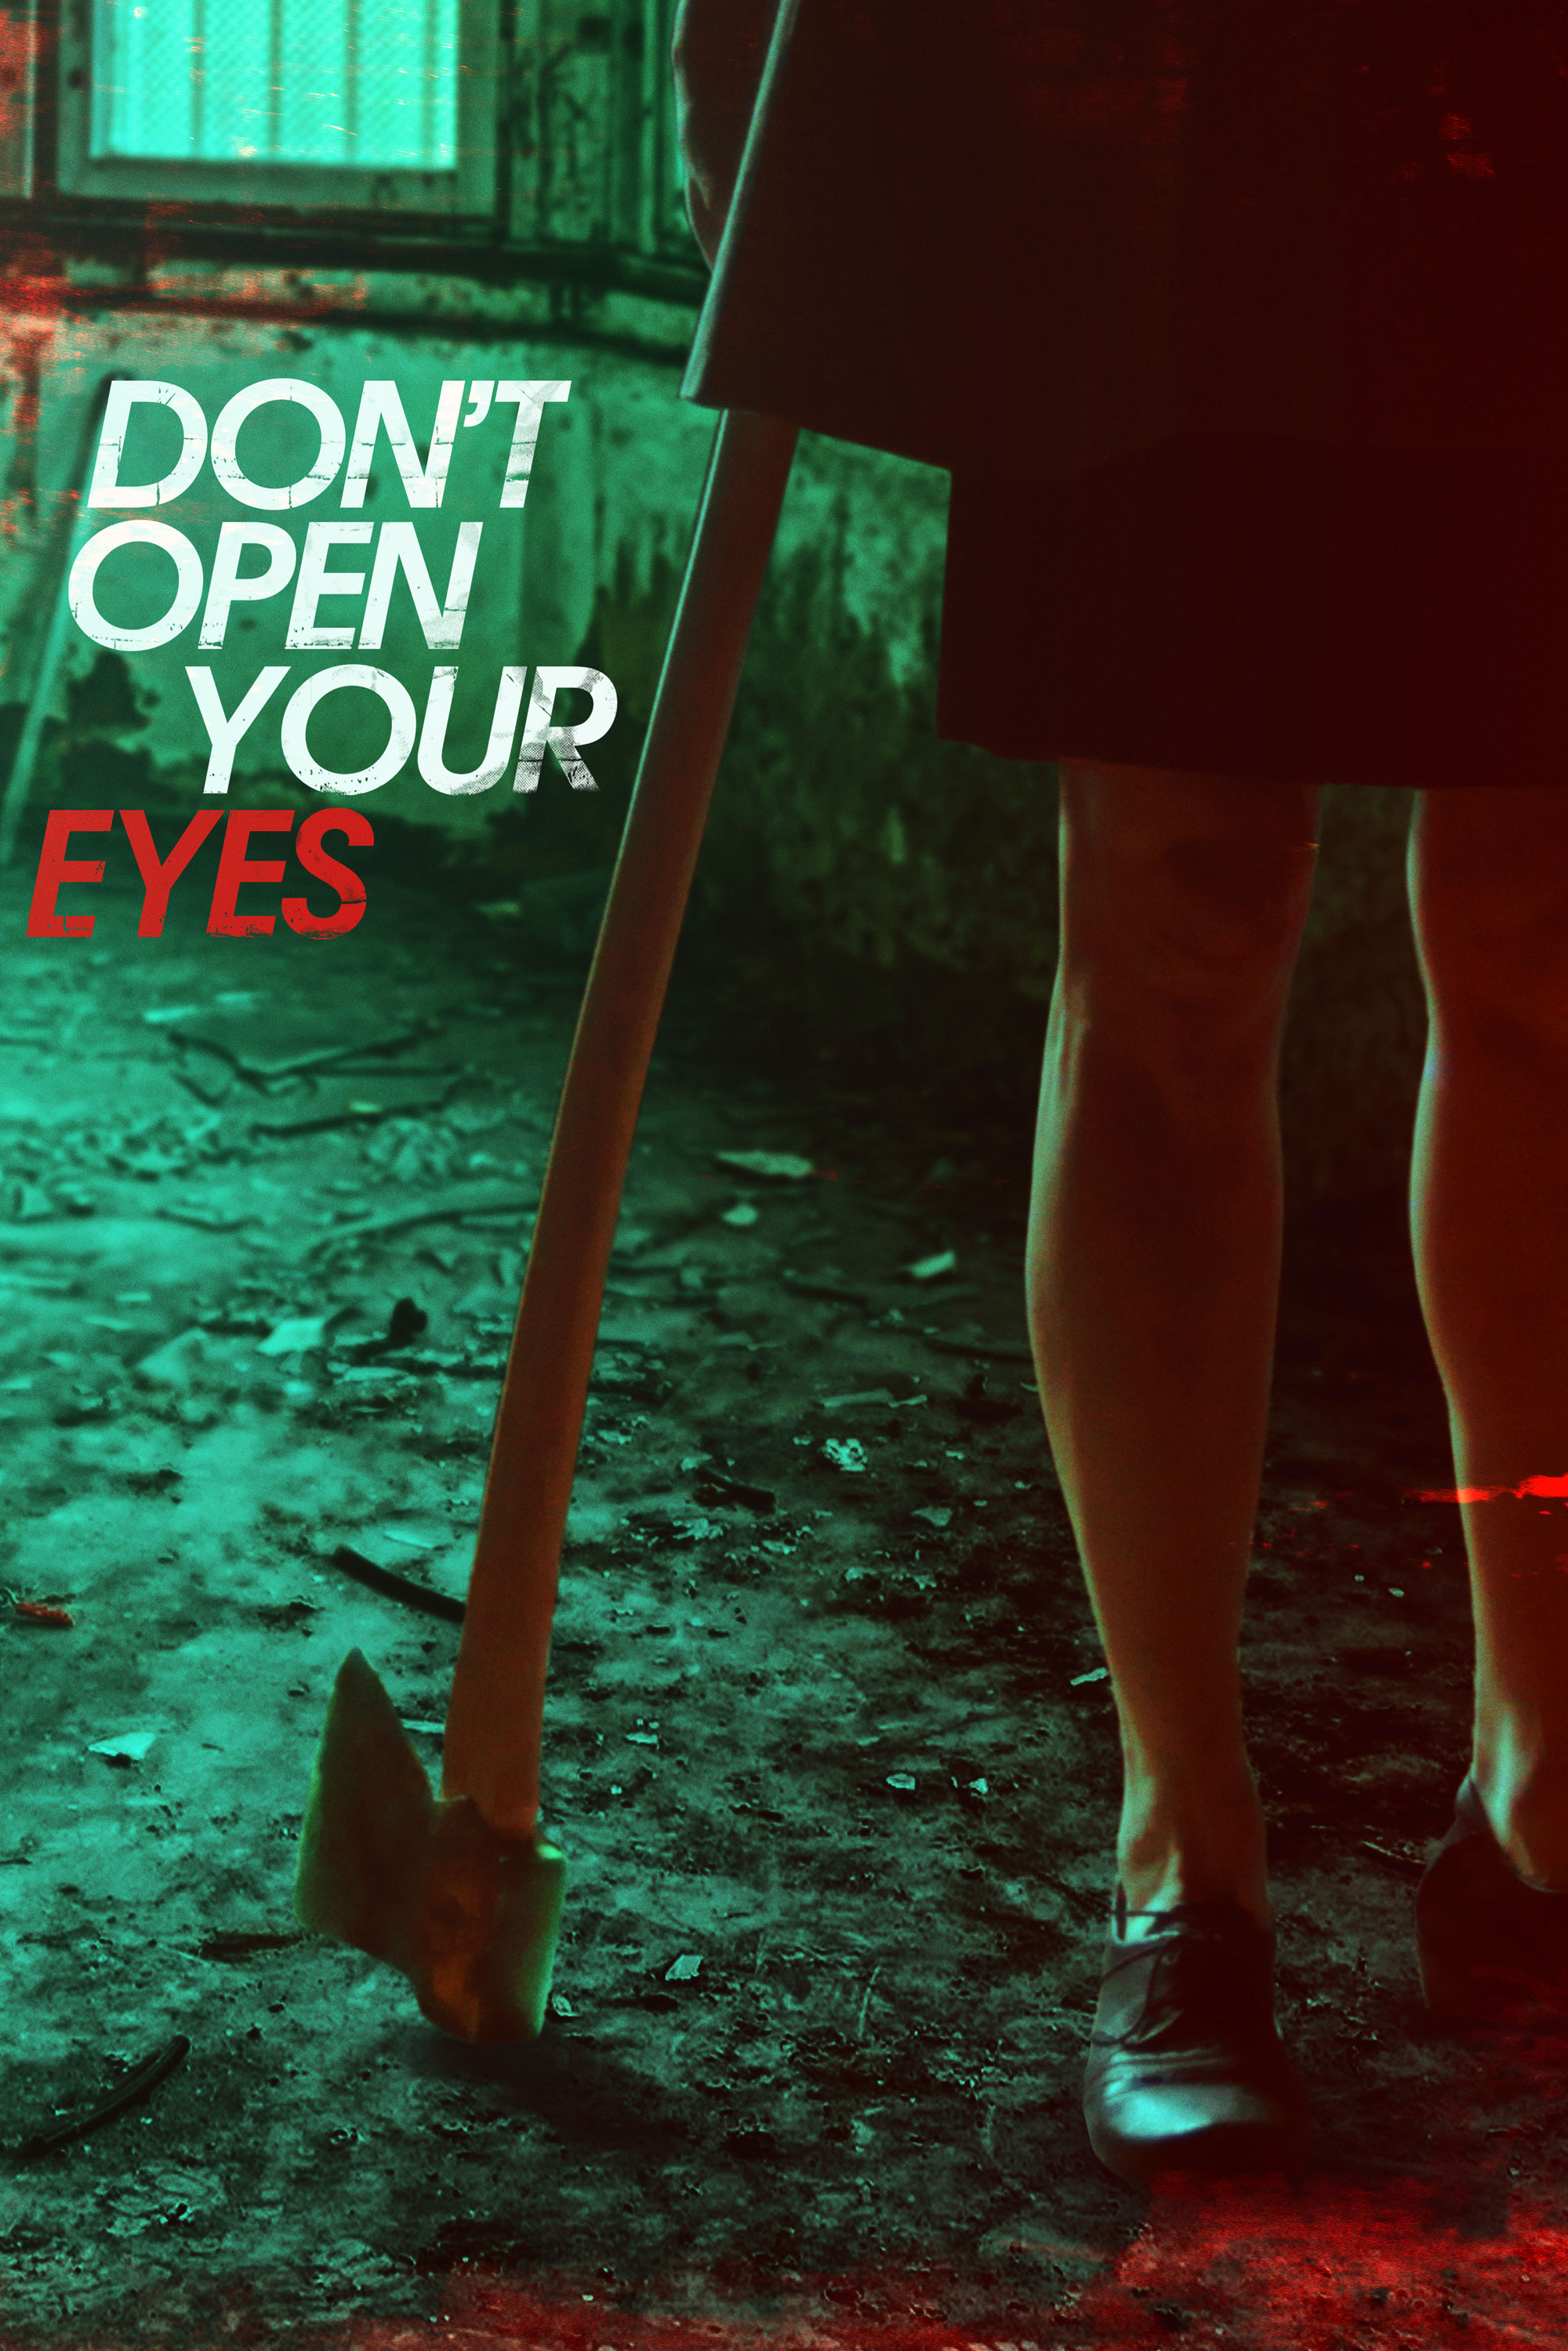 Don't) Open Your Eyes by Via